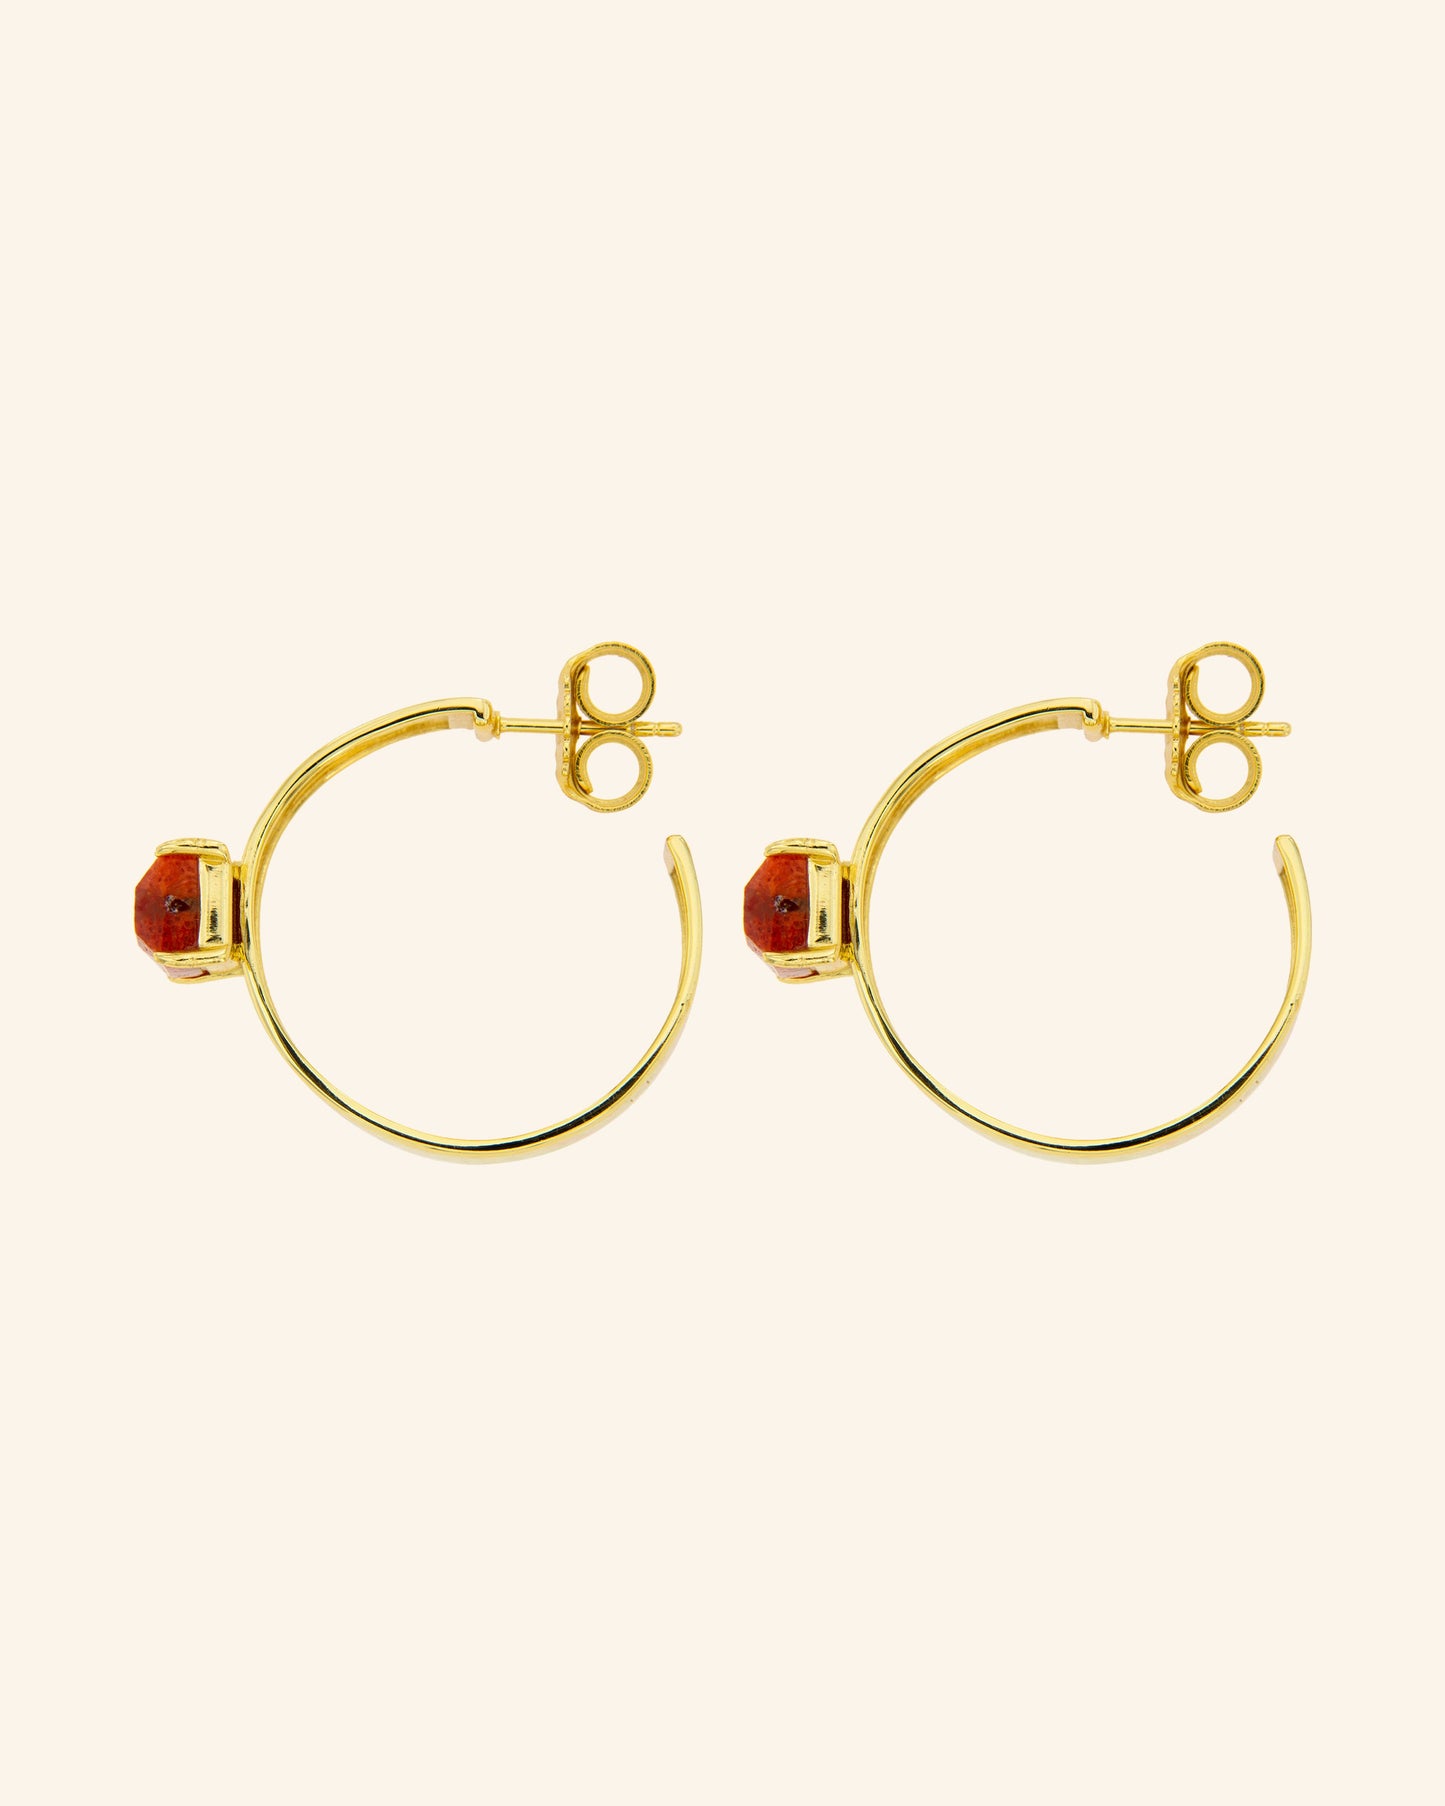 Gabo earrings with red coral